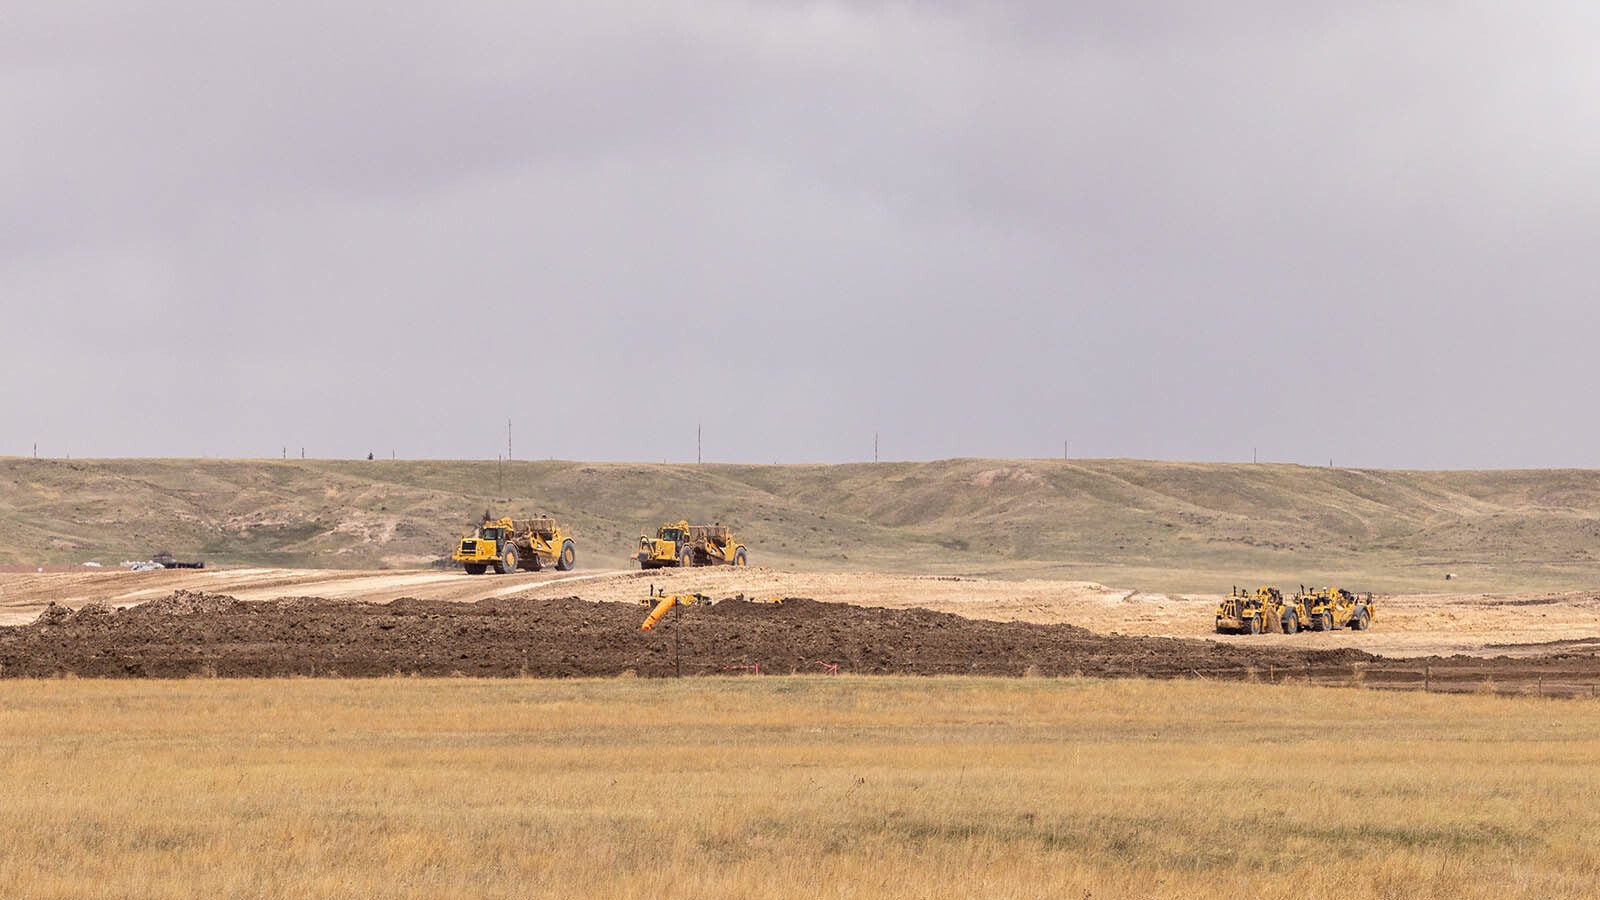 Looking north from the Bison Crossing neighborhood located south of the New High Plains Business Park, earthmoving equipment began scraping the land on over 900 acres to make way for a new Meta-backed enterprise data center that could be one of the largest ever high-technology investments in Wyoming.